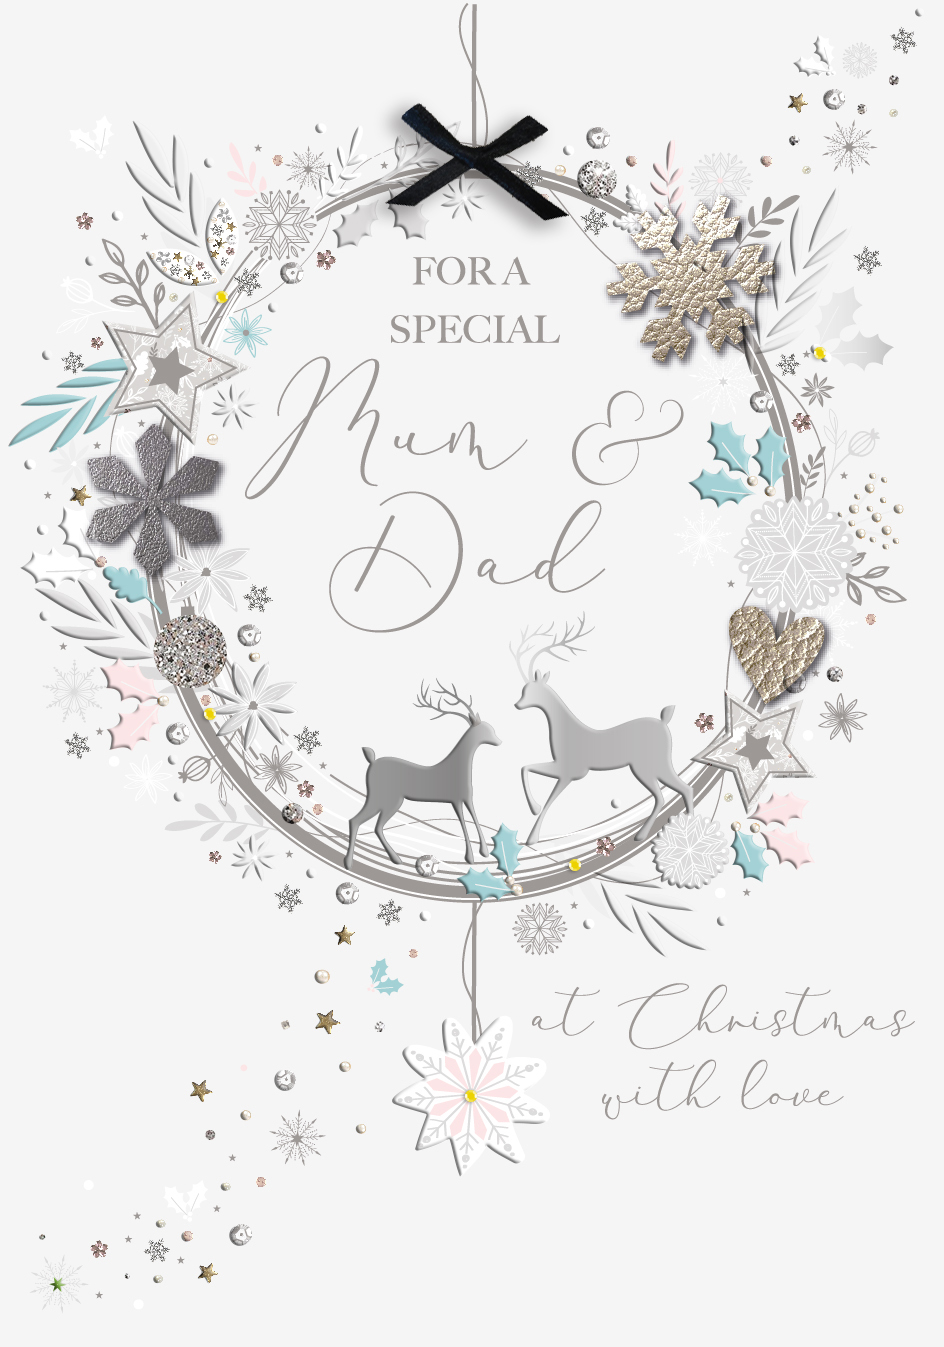 Felicitare - For A Special Mum And Dad At Christmas With Love | Ling Design